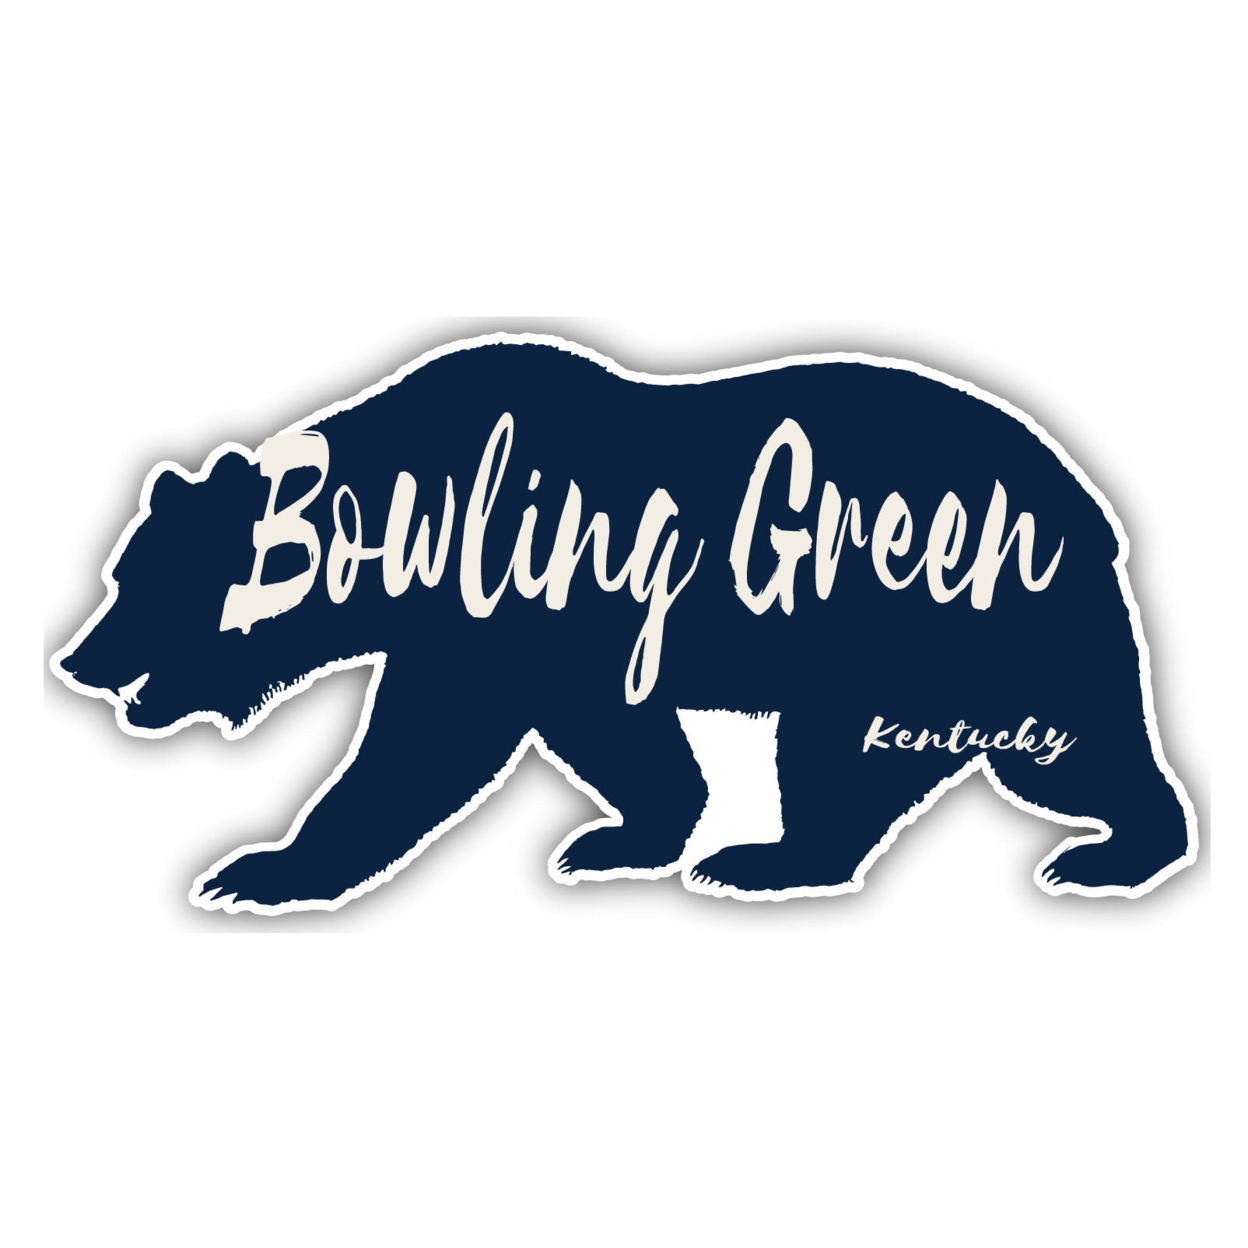 Bowling Green Kentucky Souvenir Decorative Stickers (Choose Theme And Size) - Single Unit, 6-Inch, Camp Life